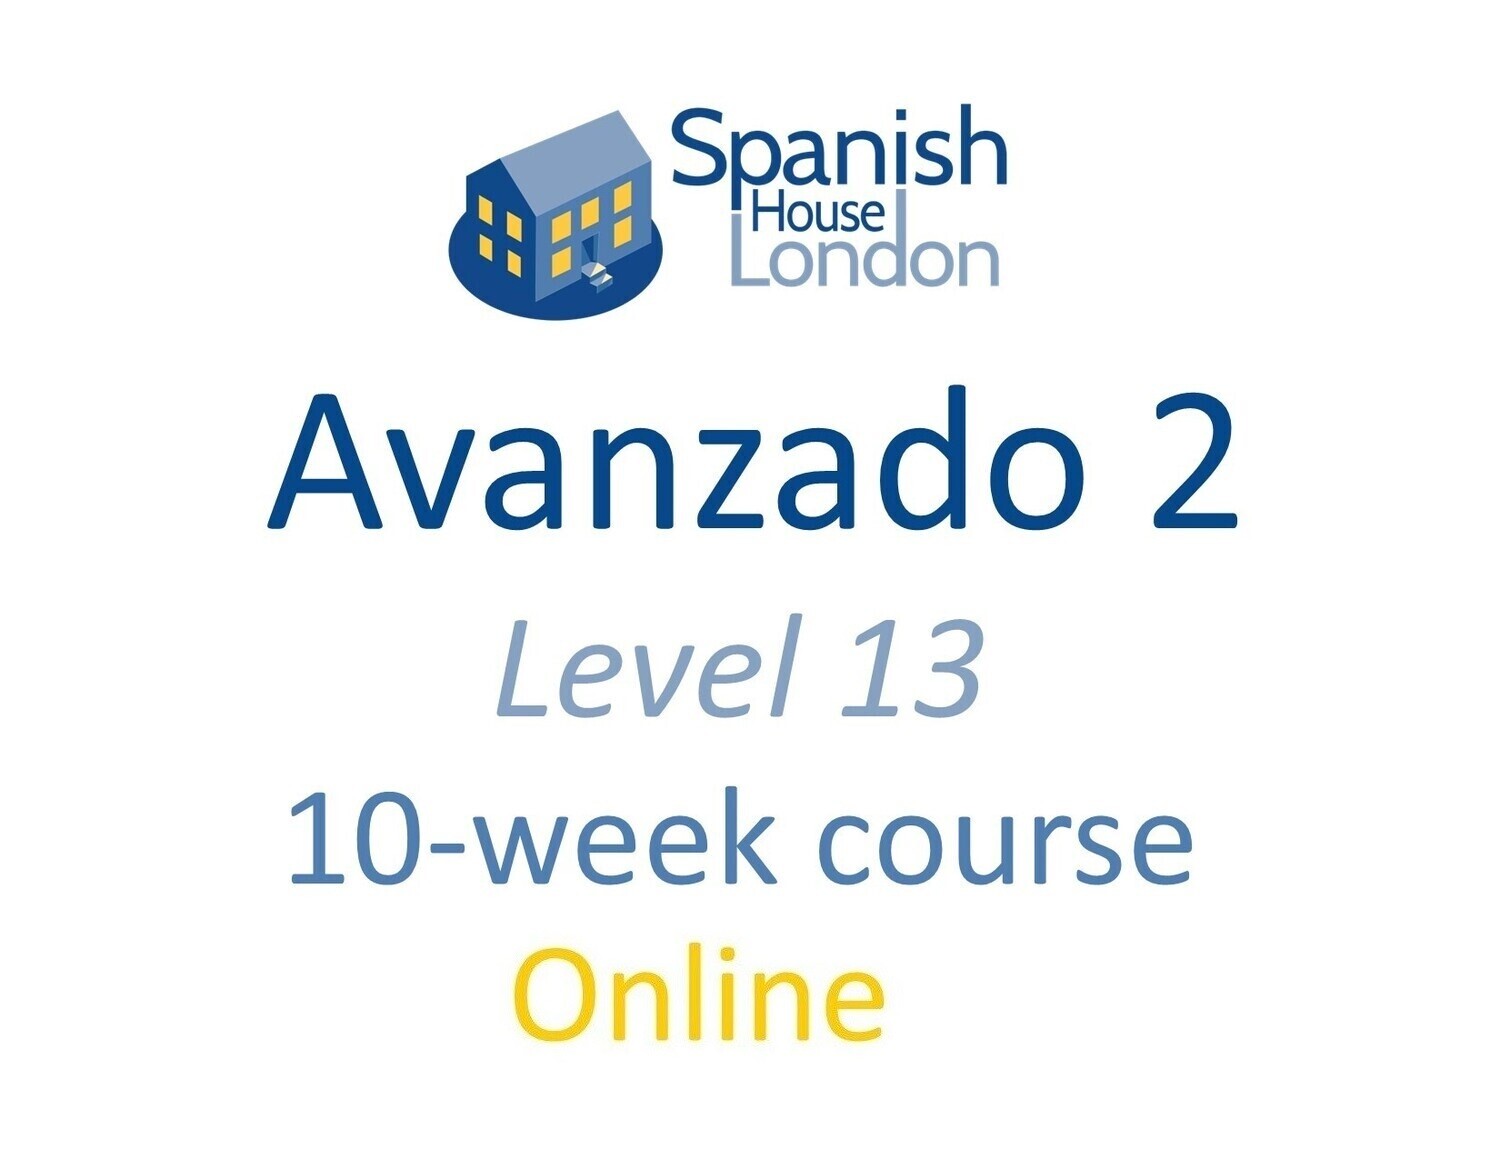 Avanzado 2 Course starting on 22nd July at 7.30pm Online